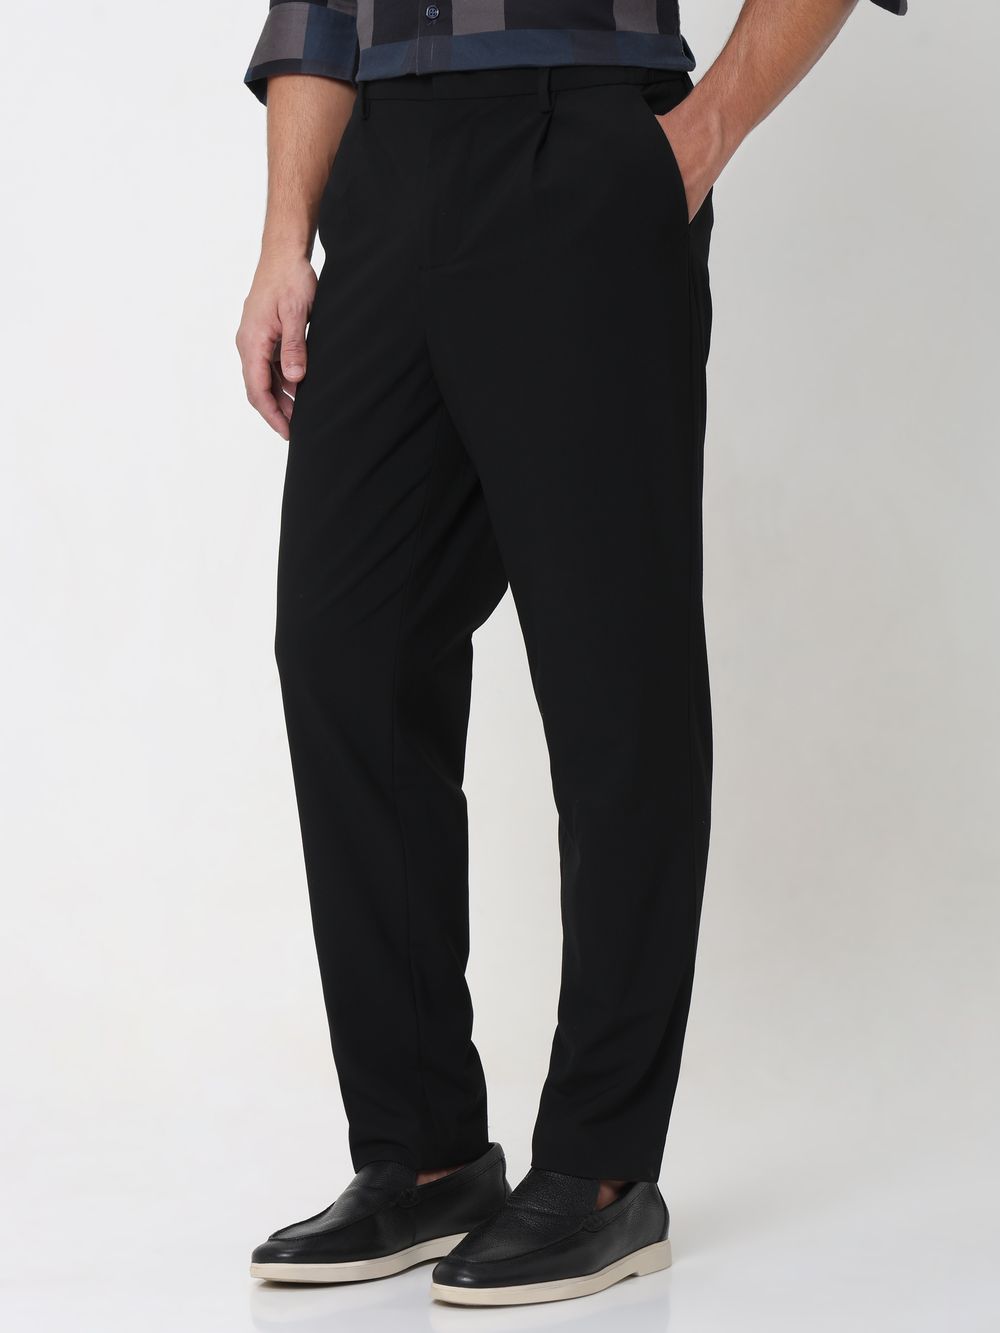 Olive Relaxed Tapered Fit Single Pleated Pants Trouser